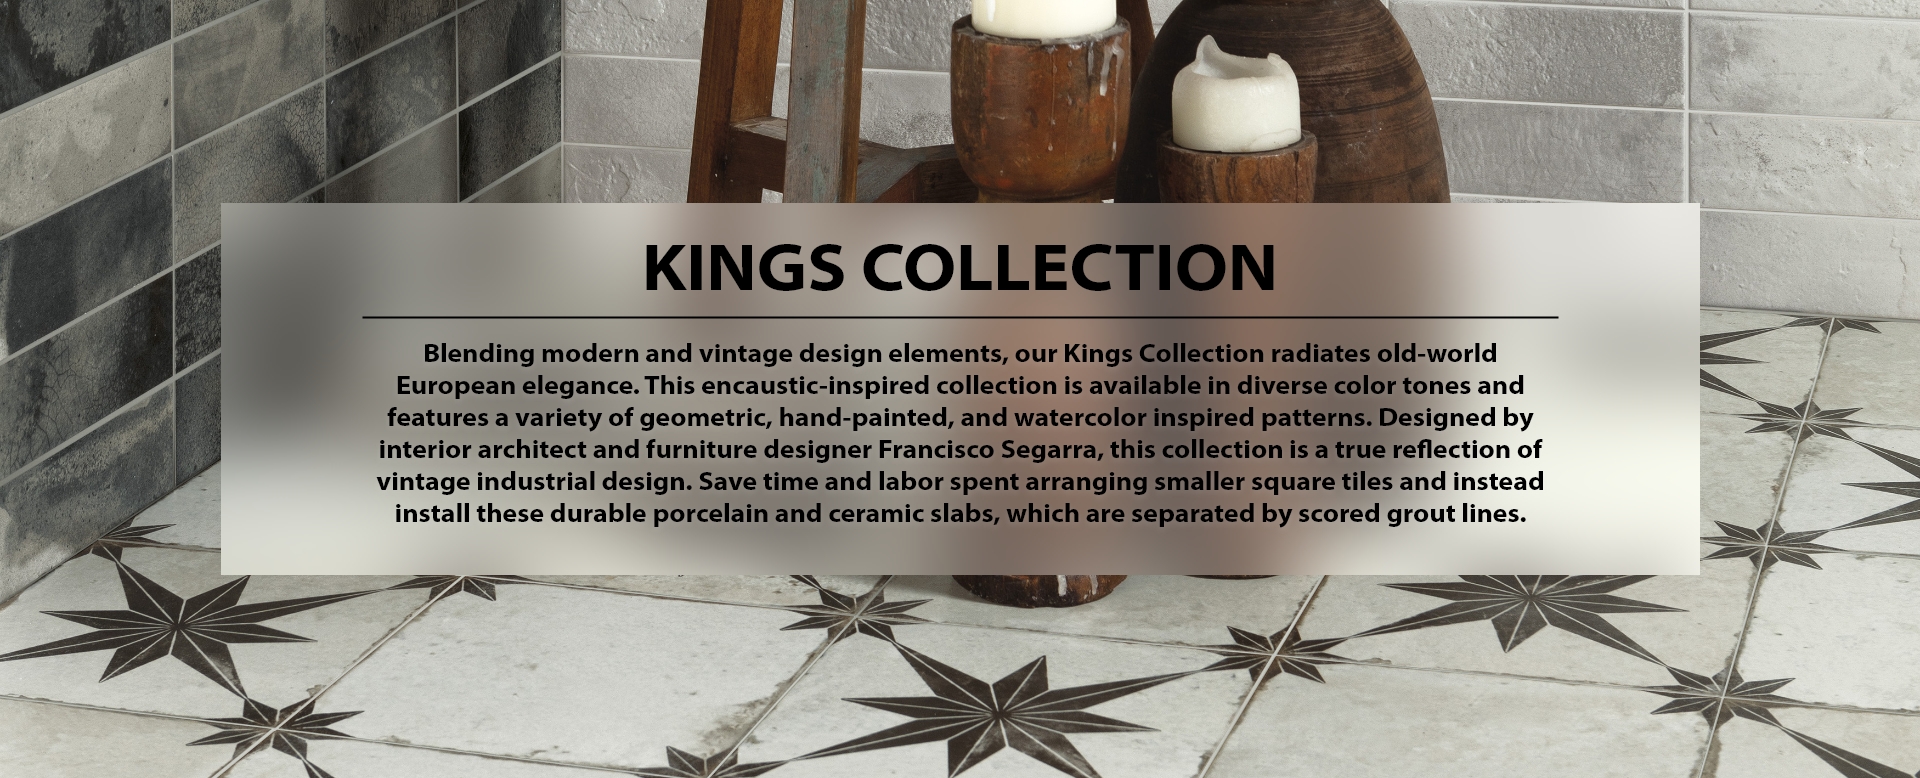 Kings Collection